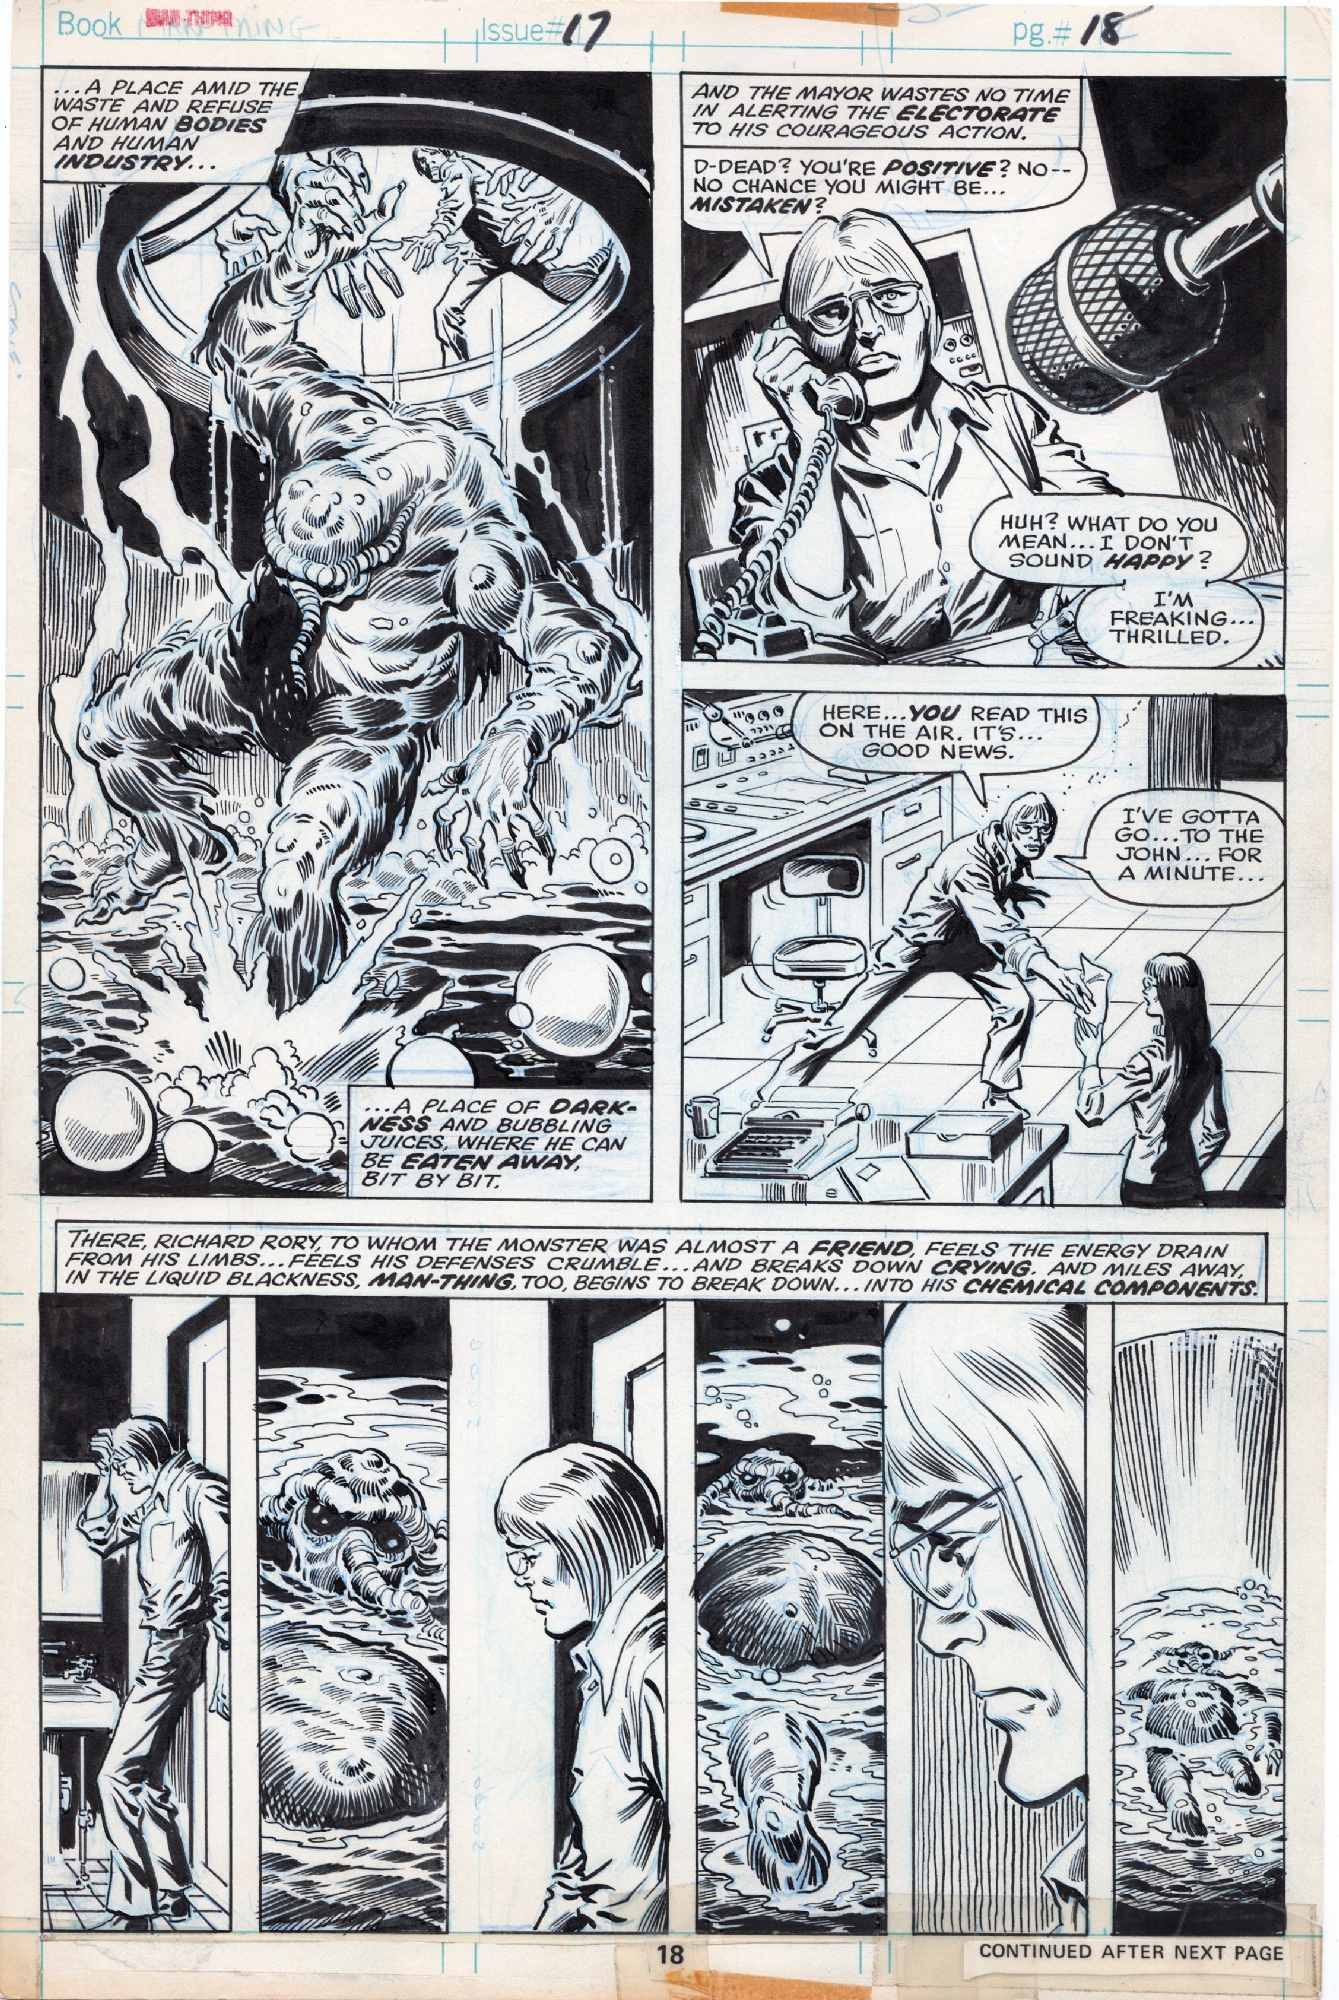 Man-Thing #17 page 18 - plus a note from Jim Mooney to Steve Gerber  (reverse), in Paul Roach's Man-Thing Comic Art Gallery Room